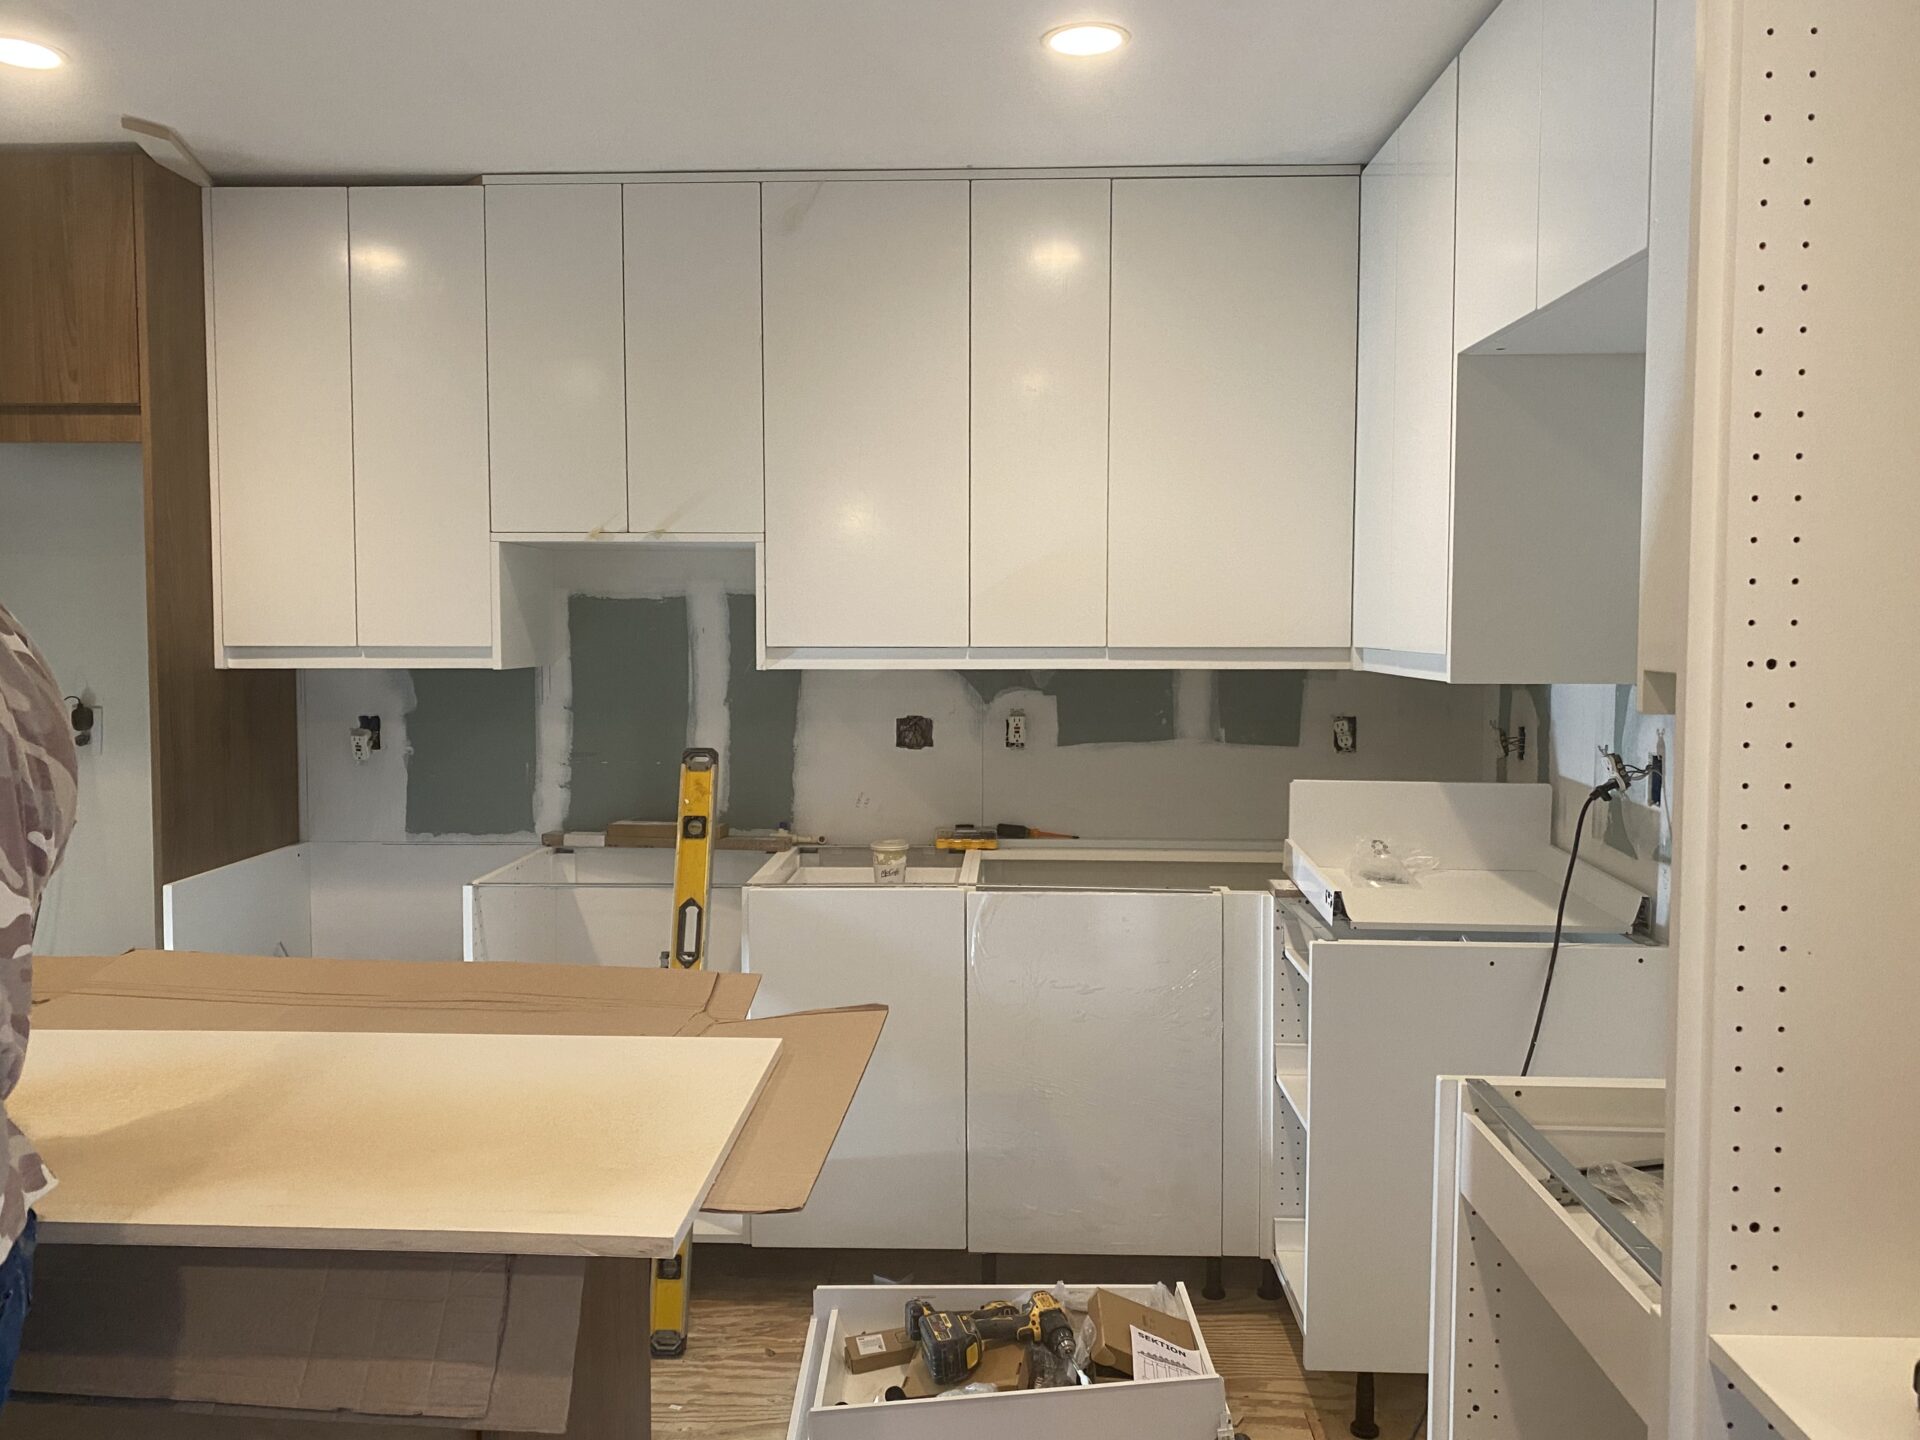 Ikea Kitchen Installation and Remodeling Services